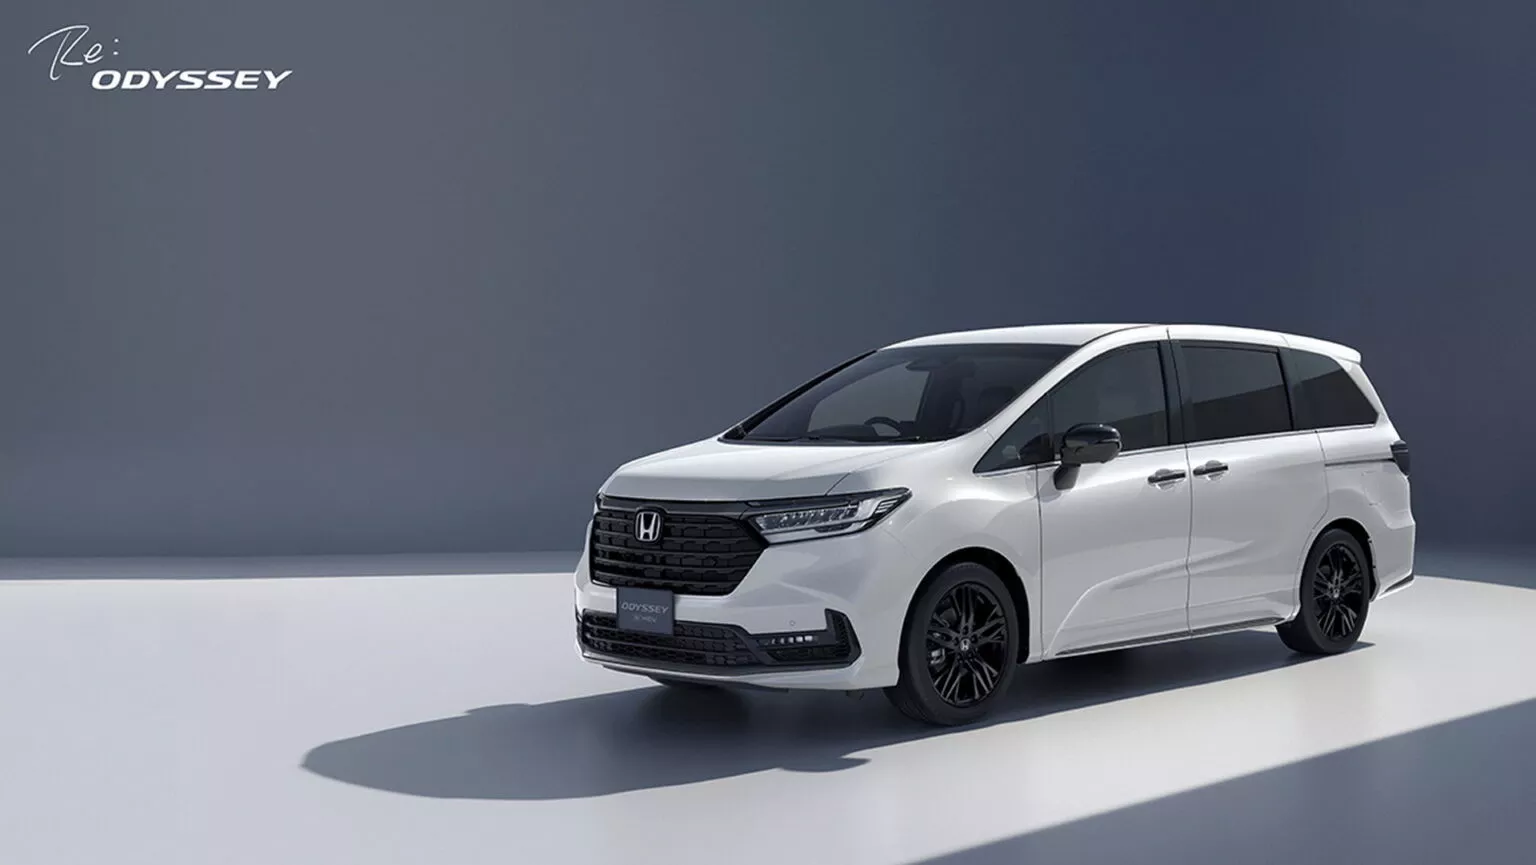 honda-odyssey-imported-in-japan-from-china-1-1536x865.webp